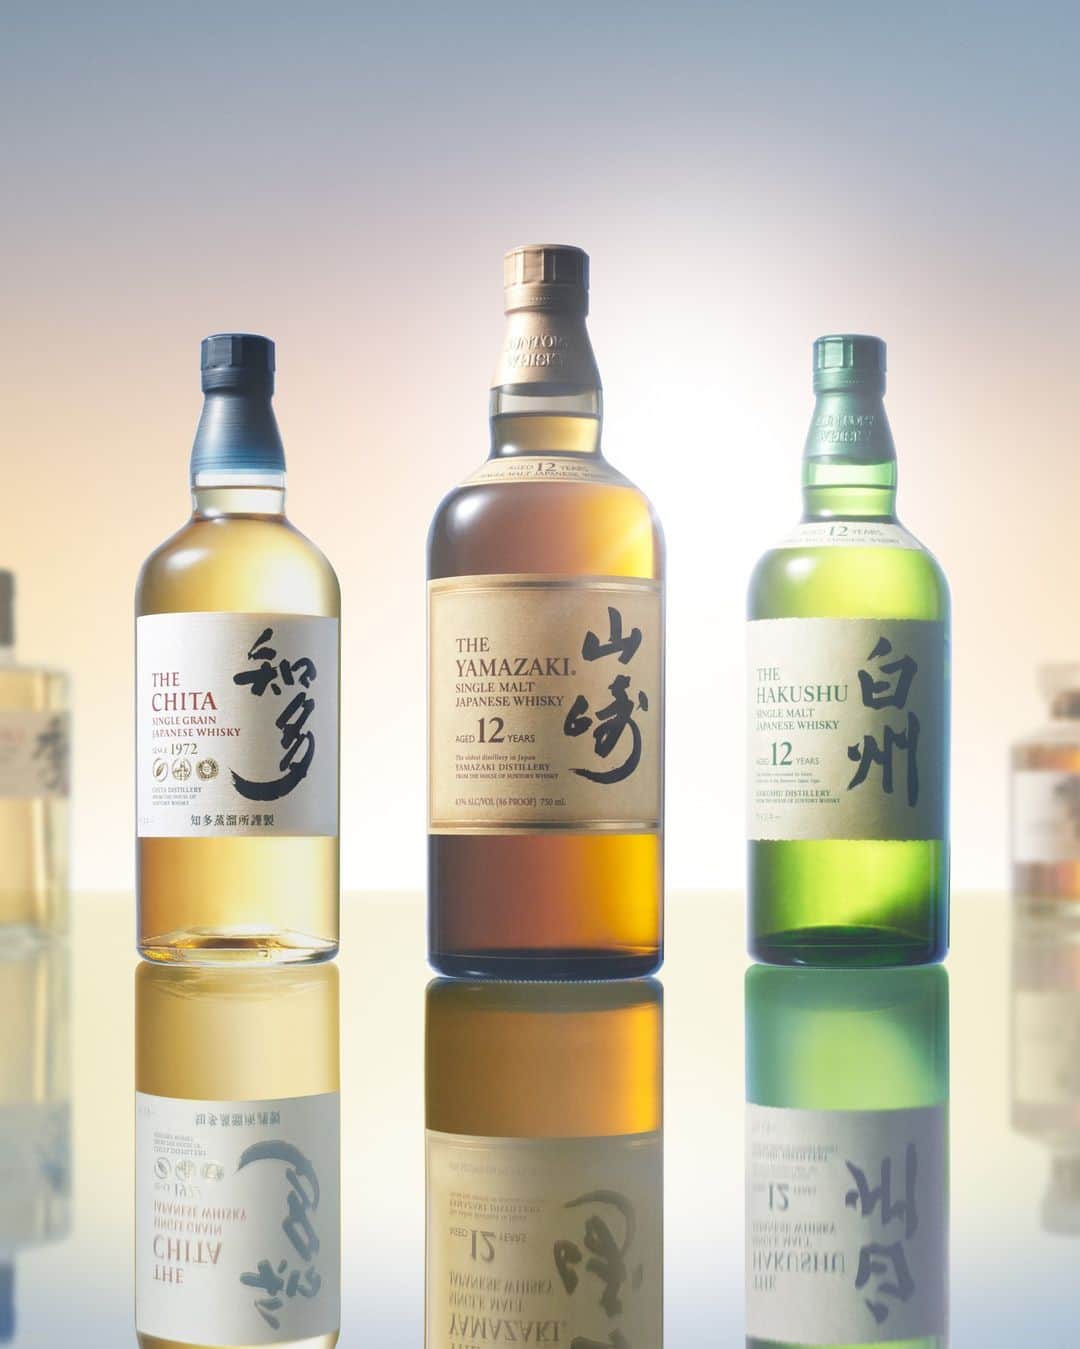 Suntory Whiskyのインスタグラム：「The House of Suntory’s whisky portfolio boasts a diverse and exquisite range of offerings, from single malts and single grain to harmonious blends - all rooted in the binding principles of Japanese nature and craftsmanship that flow through every bottle.⁣ ⁣ Celebrate a past year of achievements and the coming seasons of blessings with your loved ones with our Japanese whisky this holiday season.⁣ ⁣ *Suntory Whisky Kakubin is currently unavailable in the US.⁣ ⁣ #SuntoryTime #HouseofSuntory #SuntoryWhisky #JapaneseWhisky #Whisky #Yamazaki #Whiskygram #Drinkstagram」